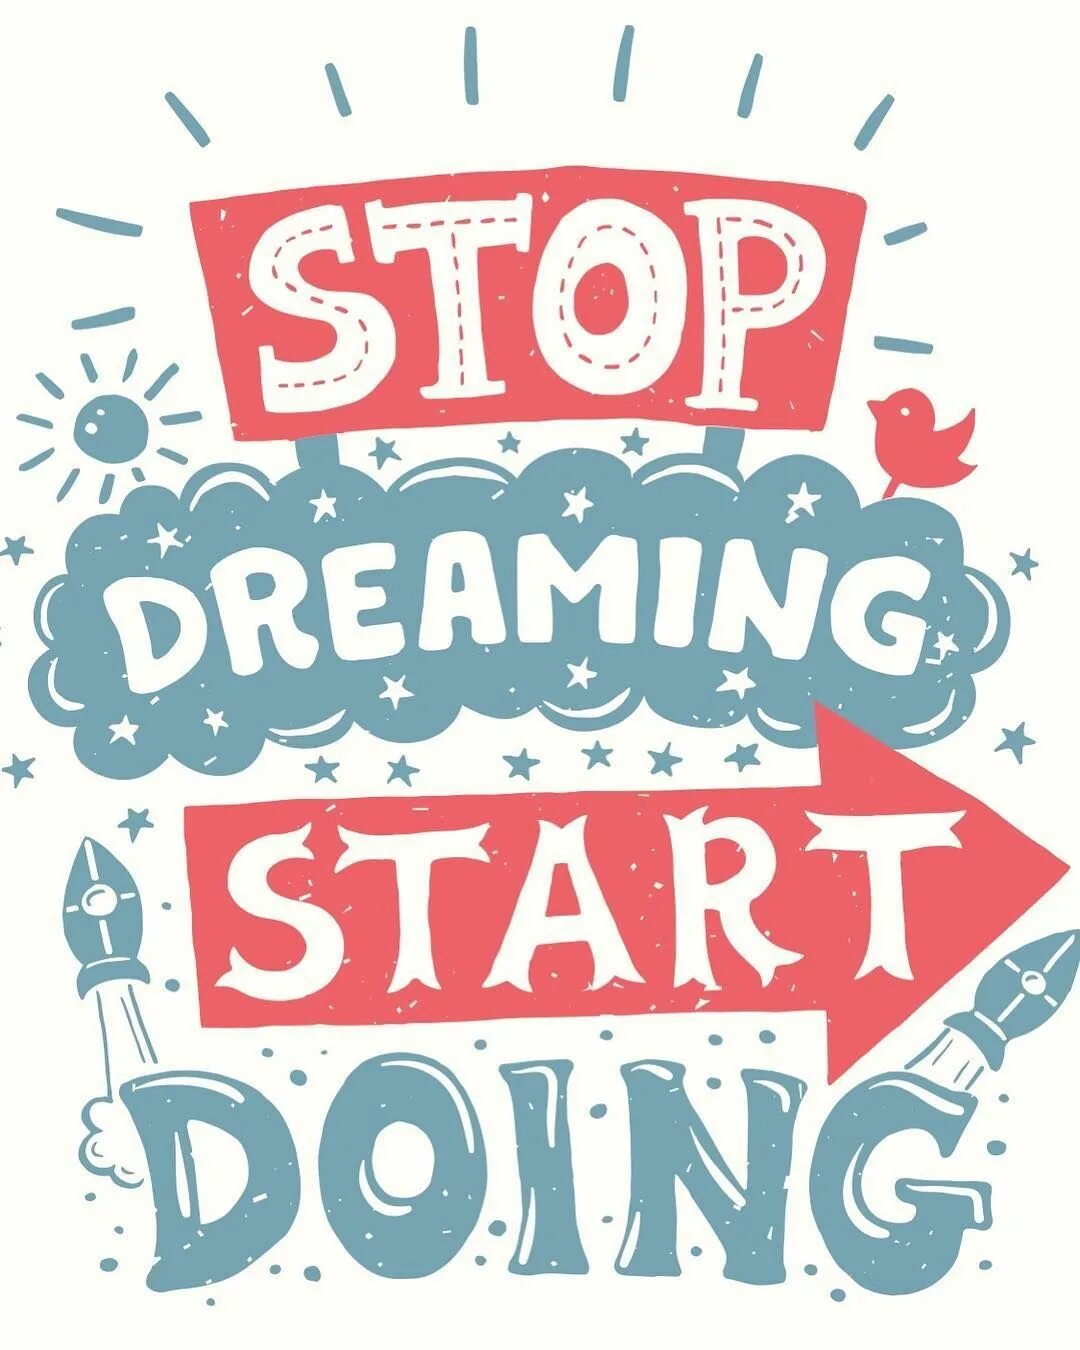 Stop Dreaming start doing. Stop Dreaming start doing Постер. Stop Dreaming start doing слоган. Never stop Dreaming poster.